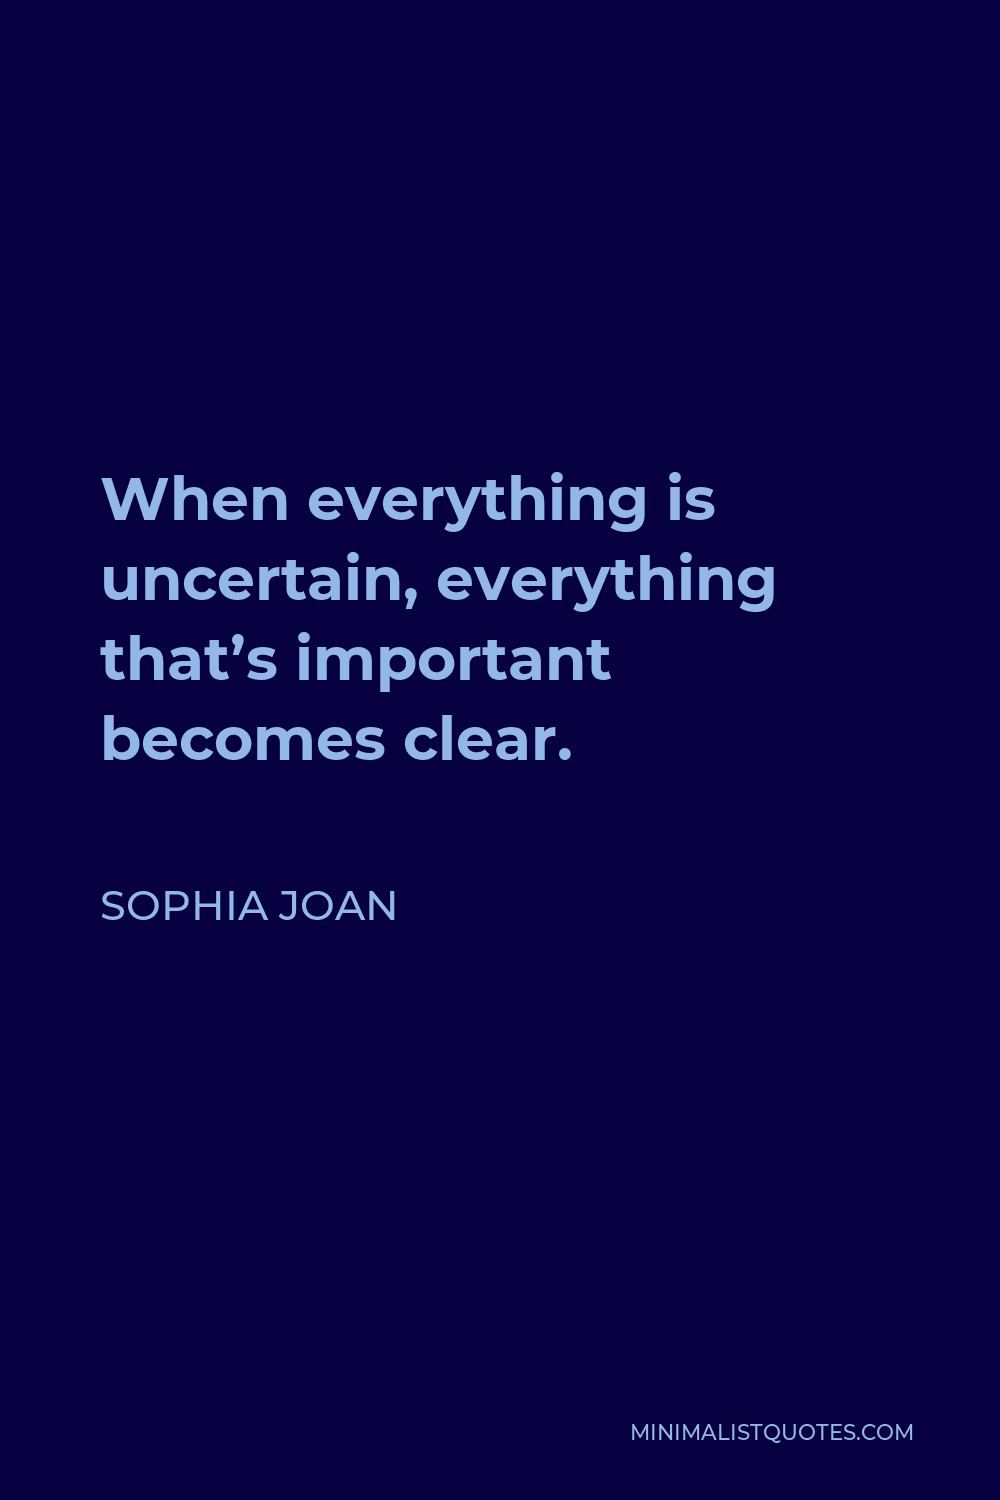 Sophia Joan Quote - When everything is uncertain, everything that’s important becomes clear.